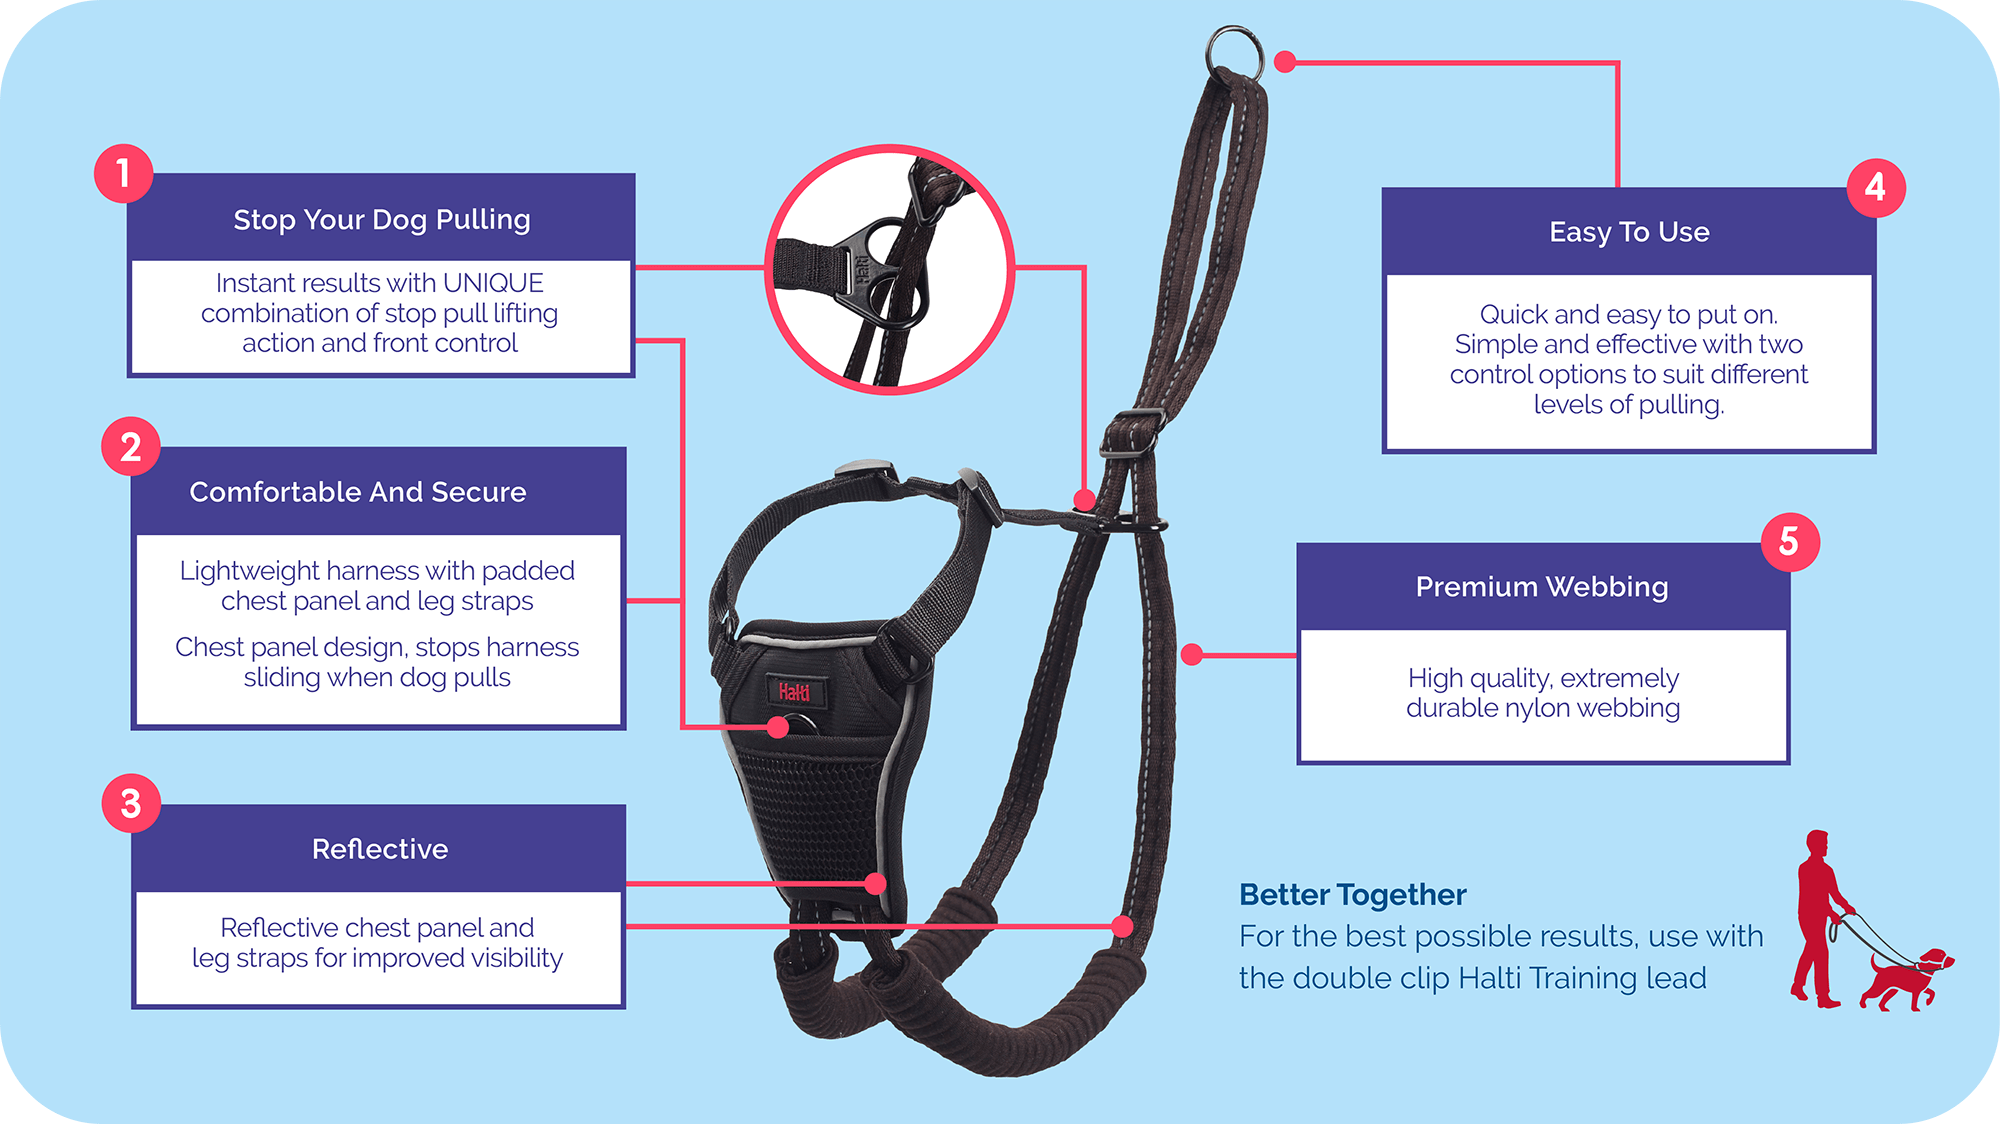 Features Guide for Halti No Pull Harness